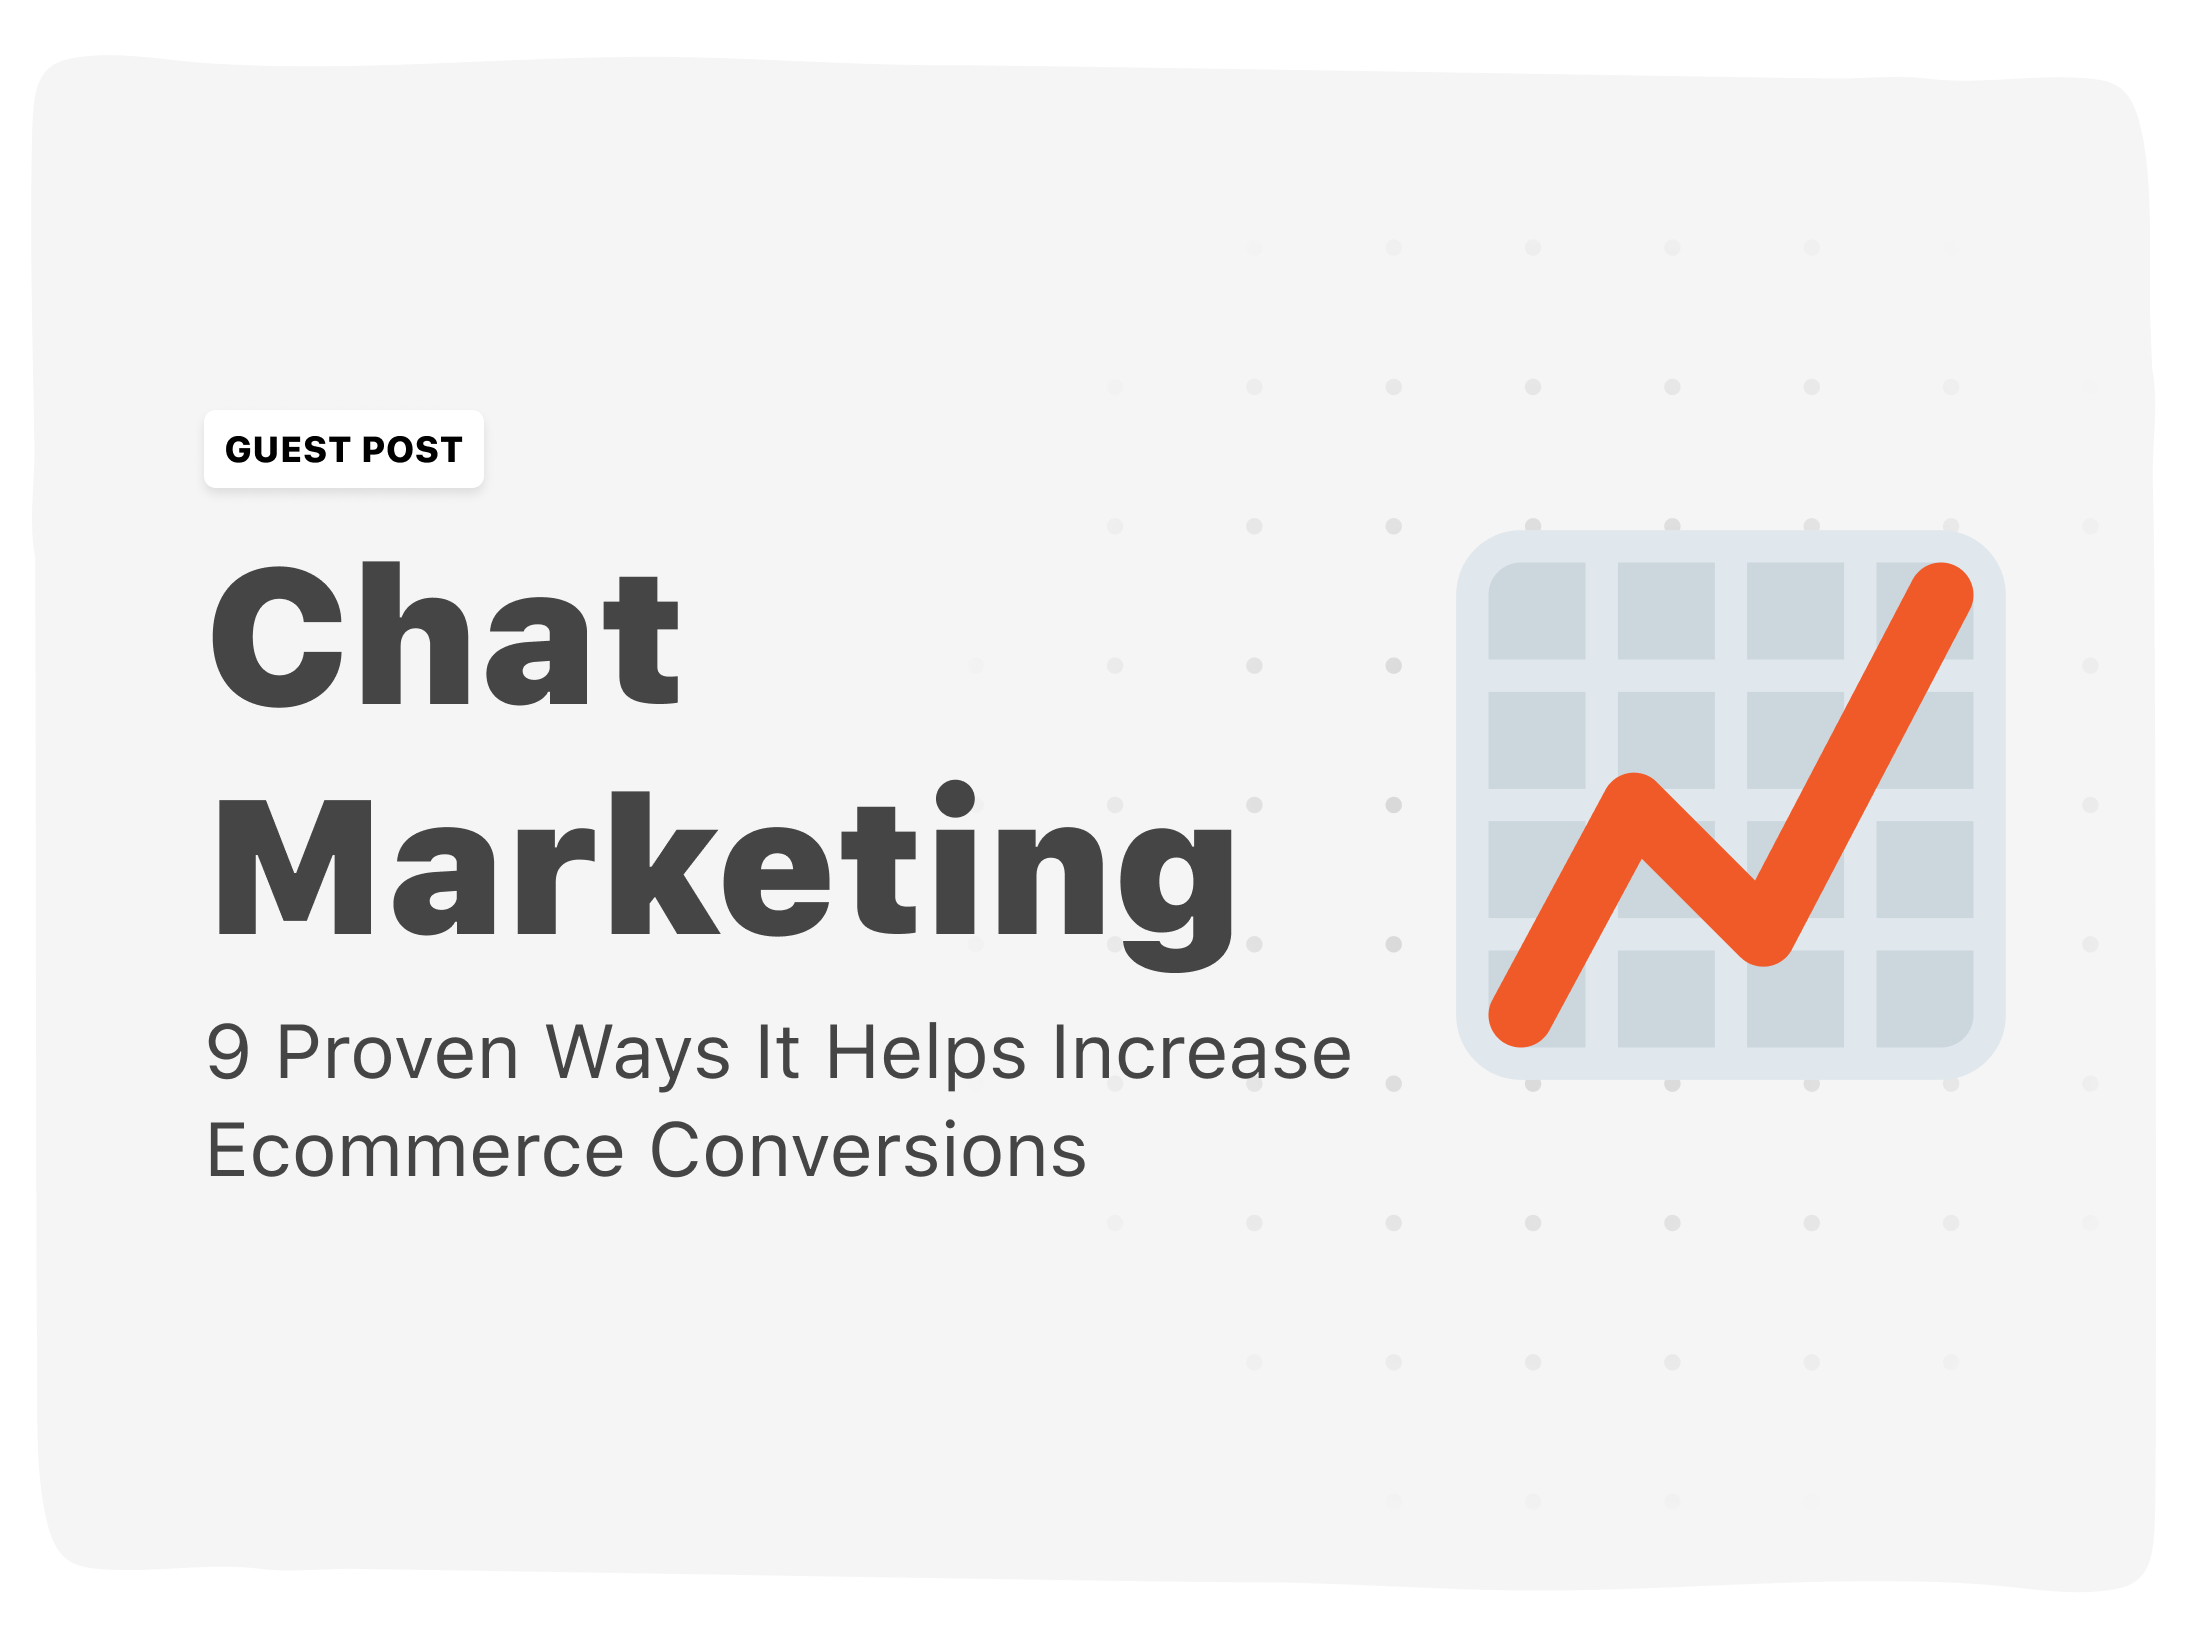 9 Proven Ways Chat Marketing Helps Increase Ecommerce Conversions